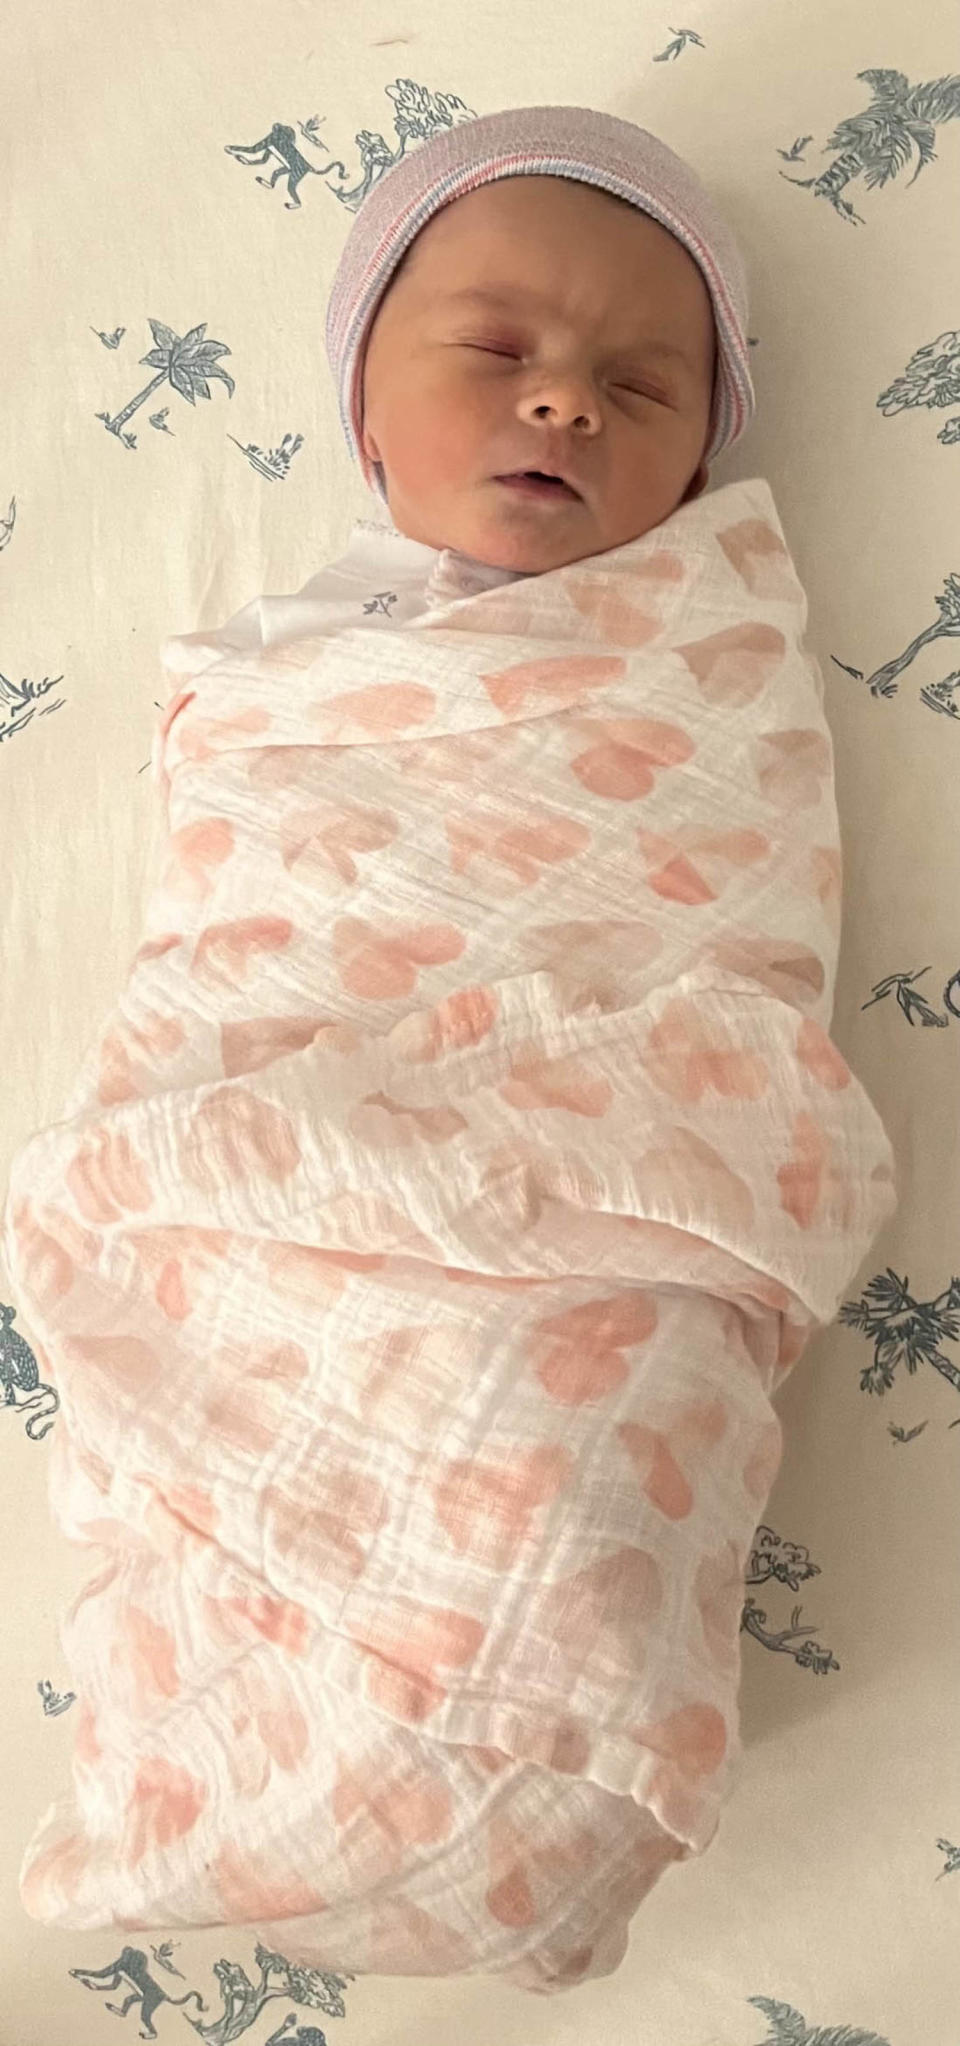 A baby on white and blue sheets swaddled in a white blanket with pink hearts. (Courtesy of Nicole Wallace)